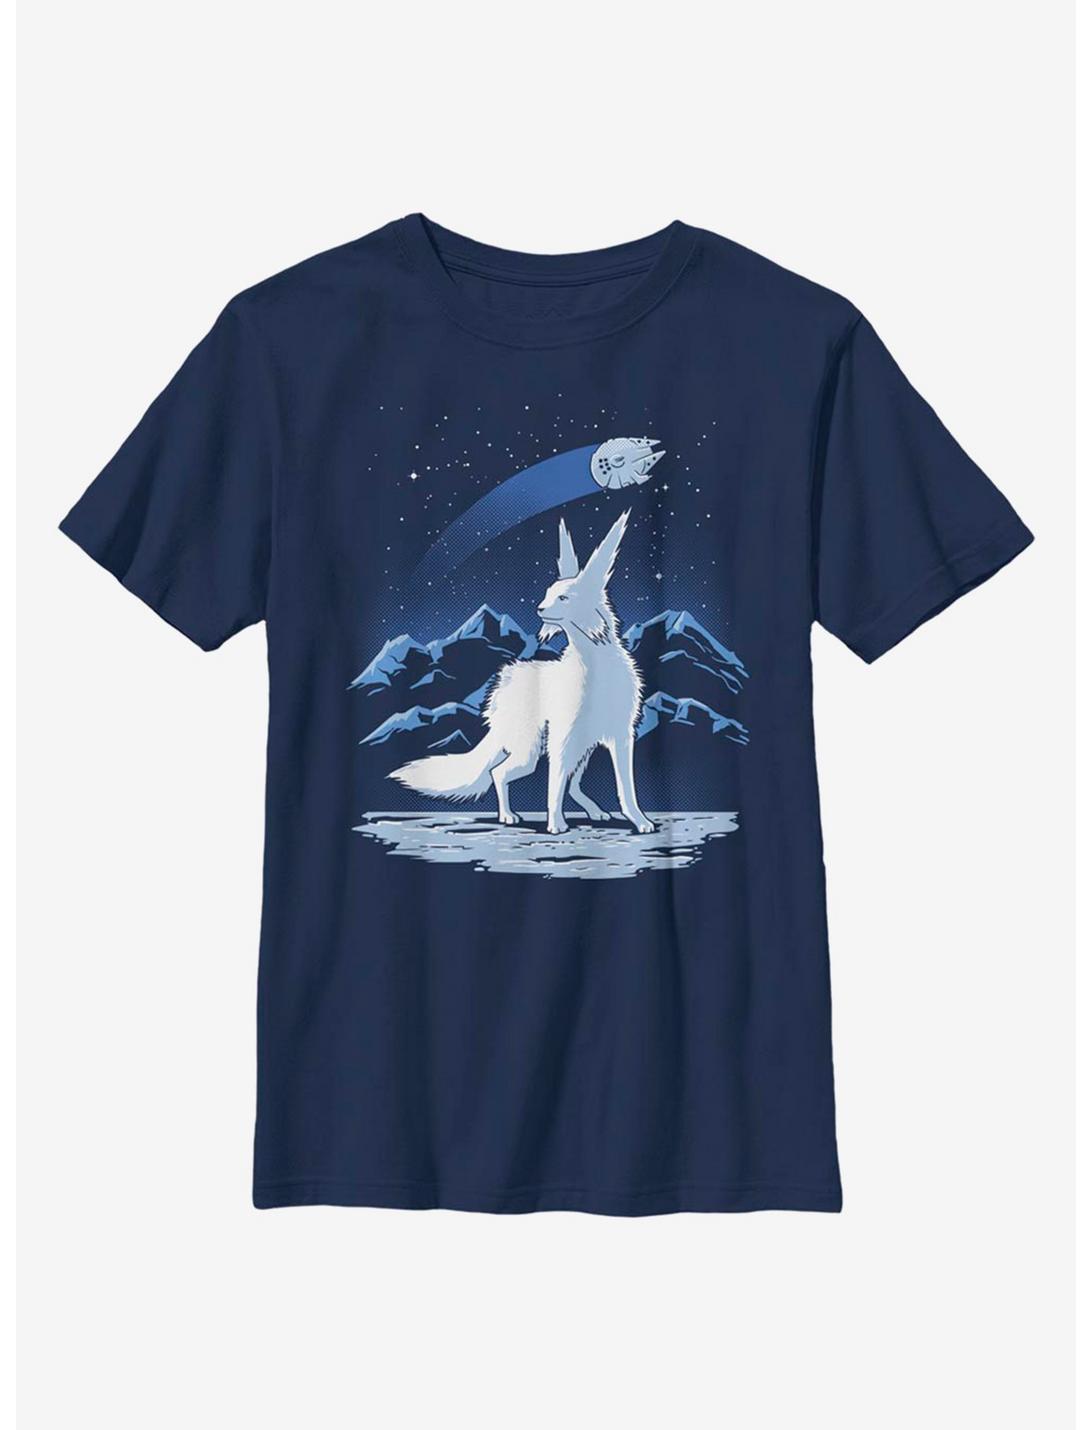 Star Wars Episode VIII: The Last Jedi Vulptex And Falcon Youth T-Shirt, NAVY, hi-res